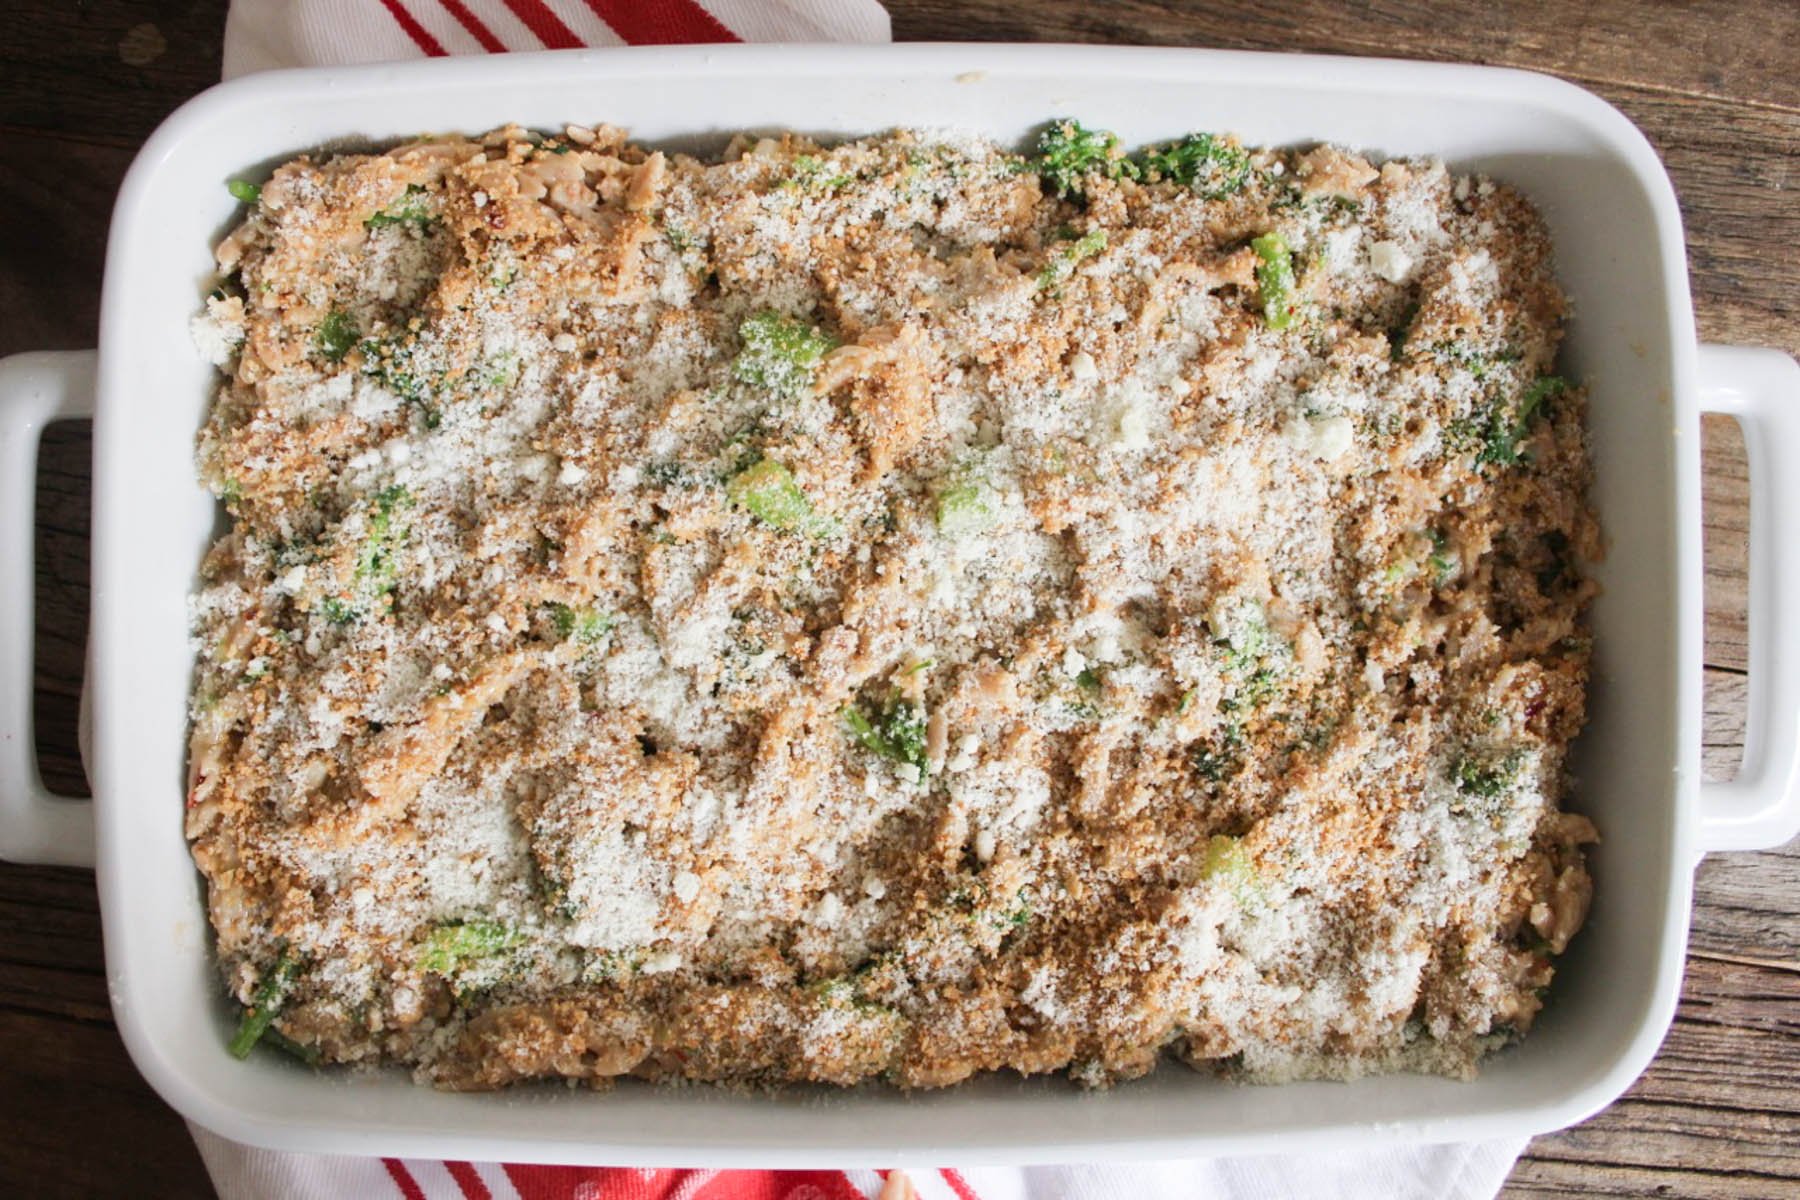 baked-orzo-casserole-with-turkey-sausage-broccolini-fontina-step-8